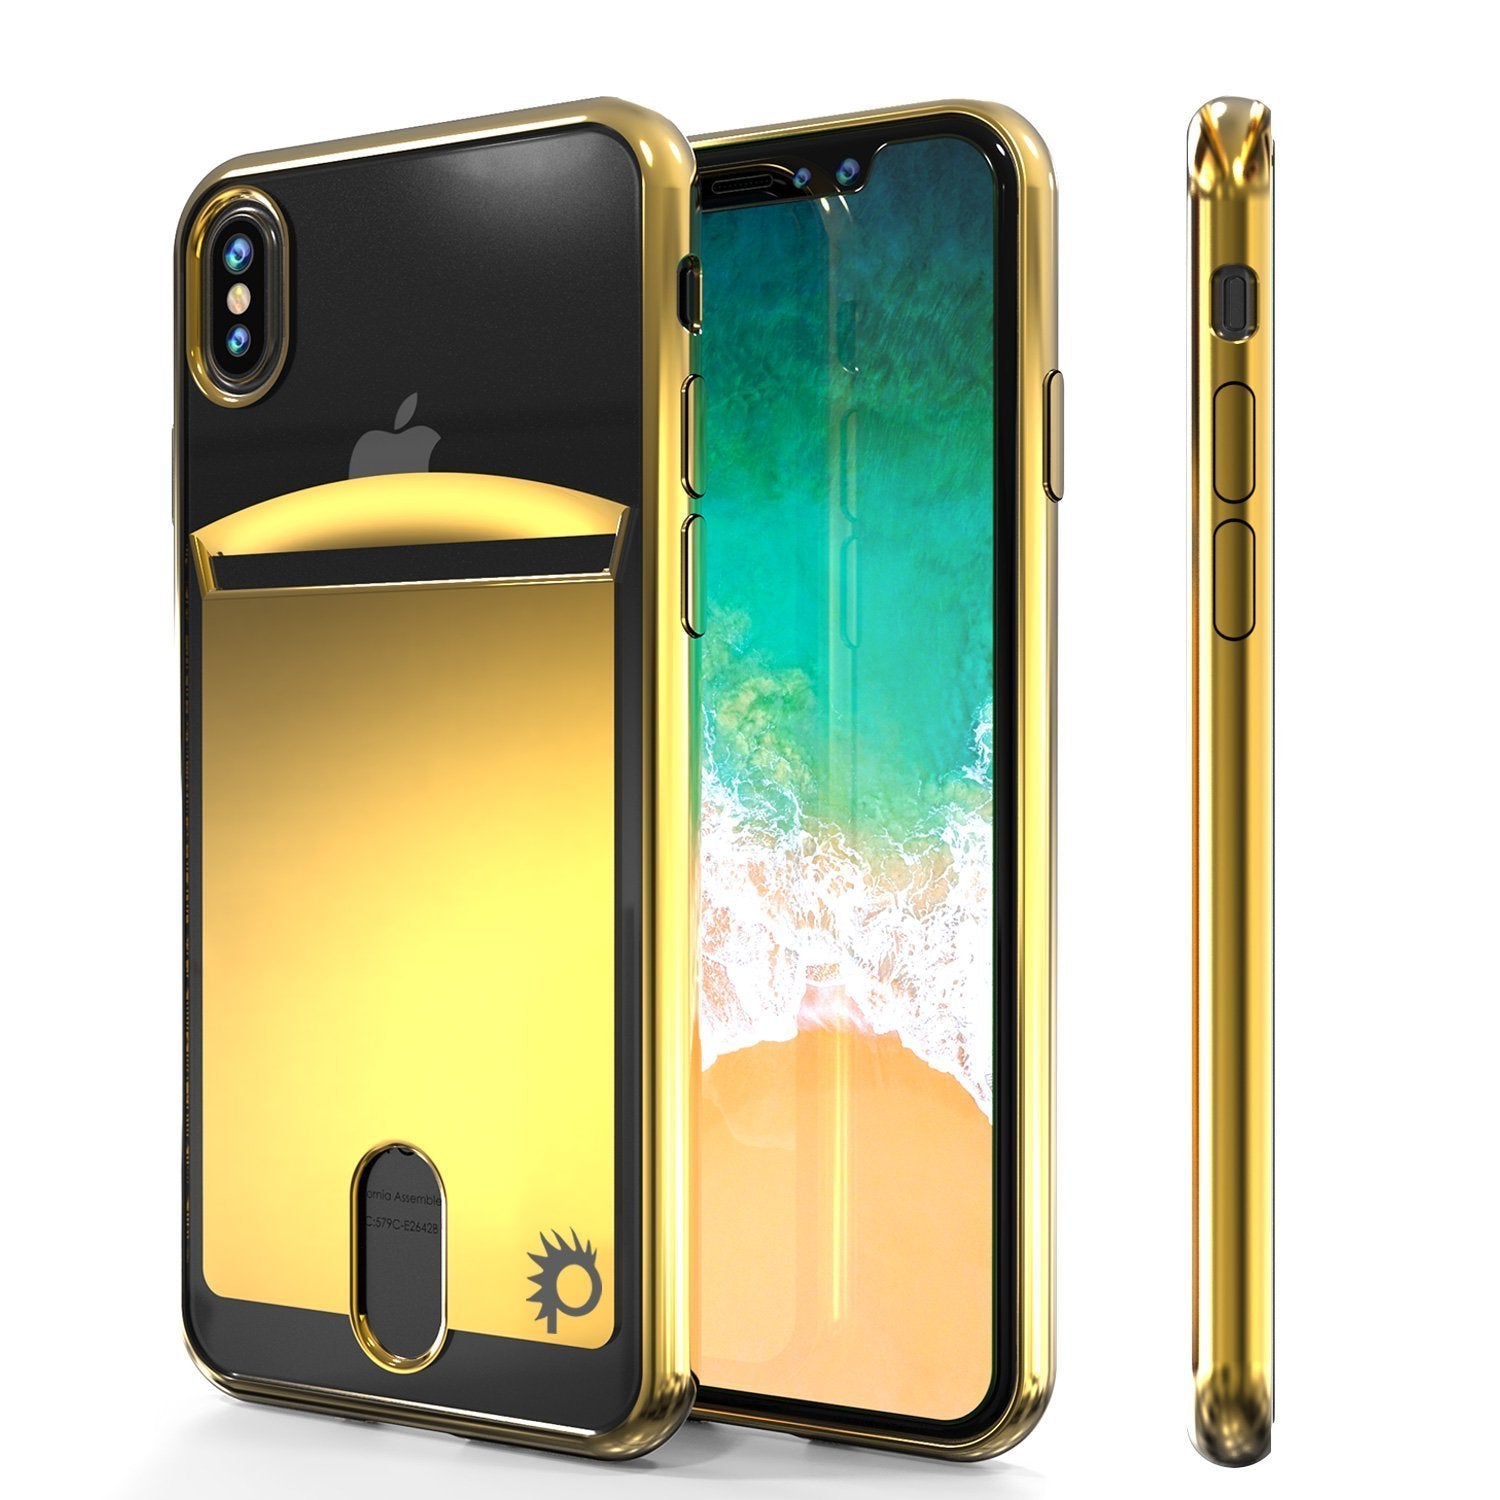 iPhone X Case, PUNKcase [LUCID Series] Slim Fit Protective Dual Layer Armor Cover [Gold]